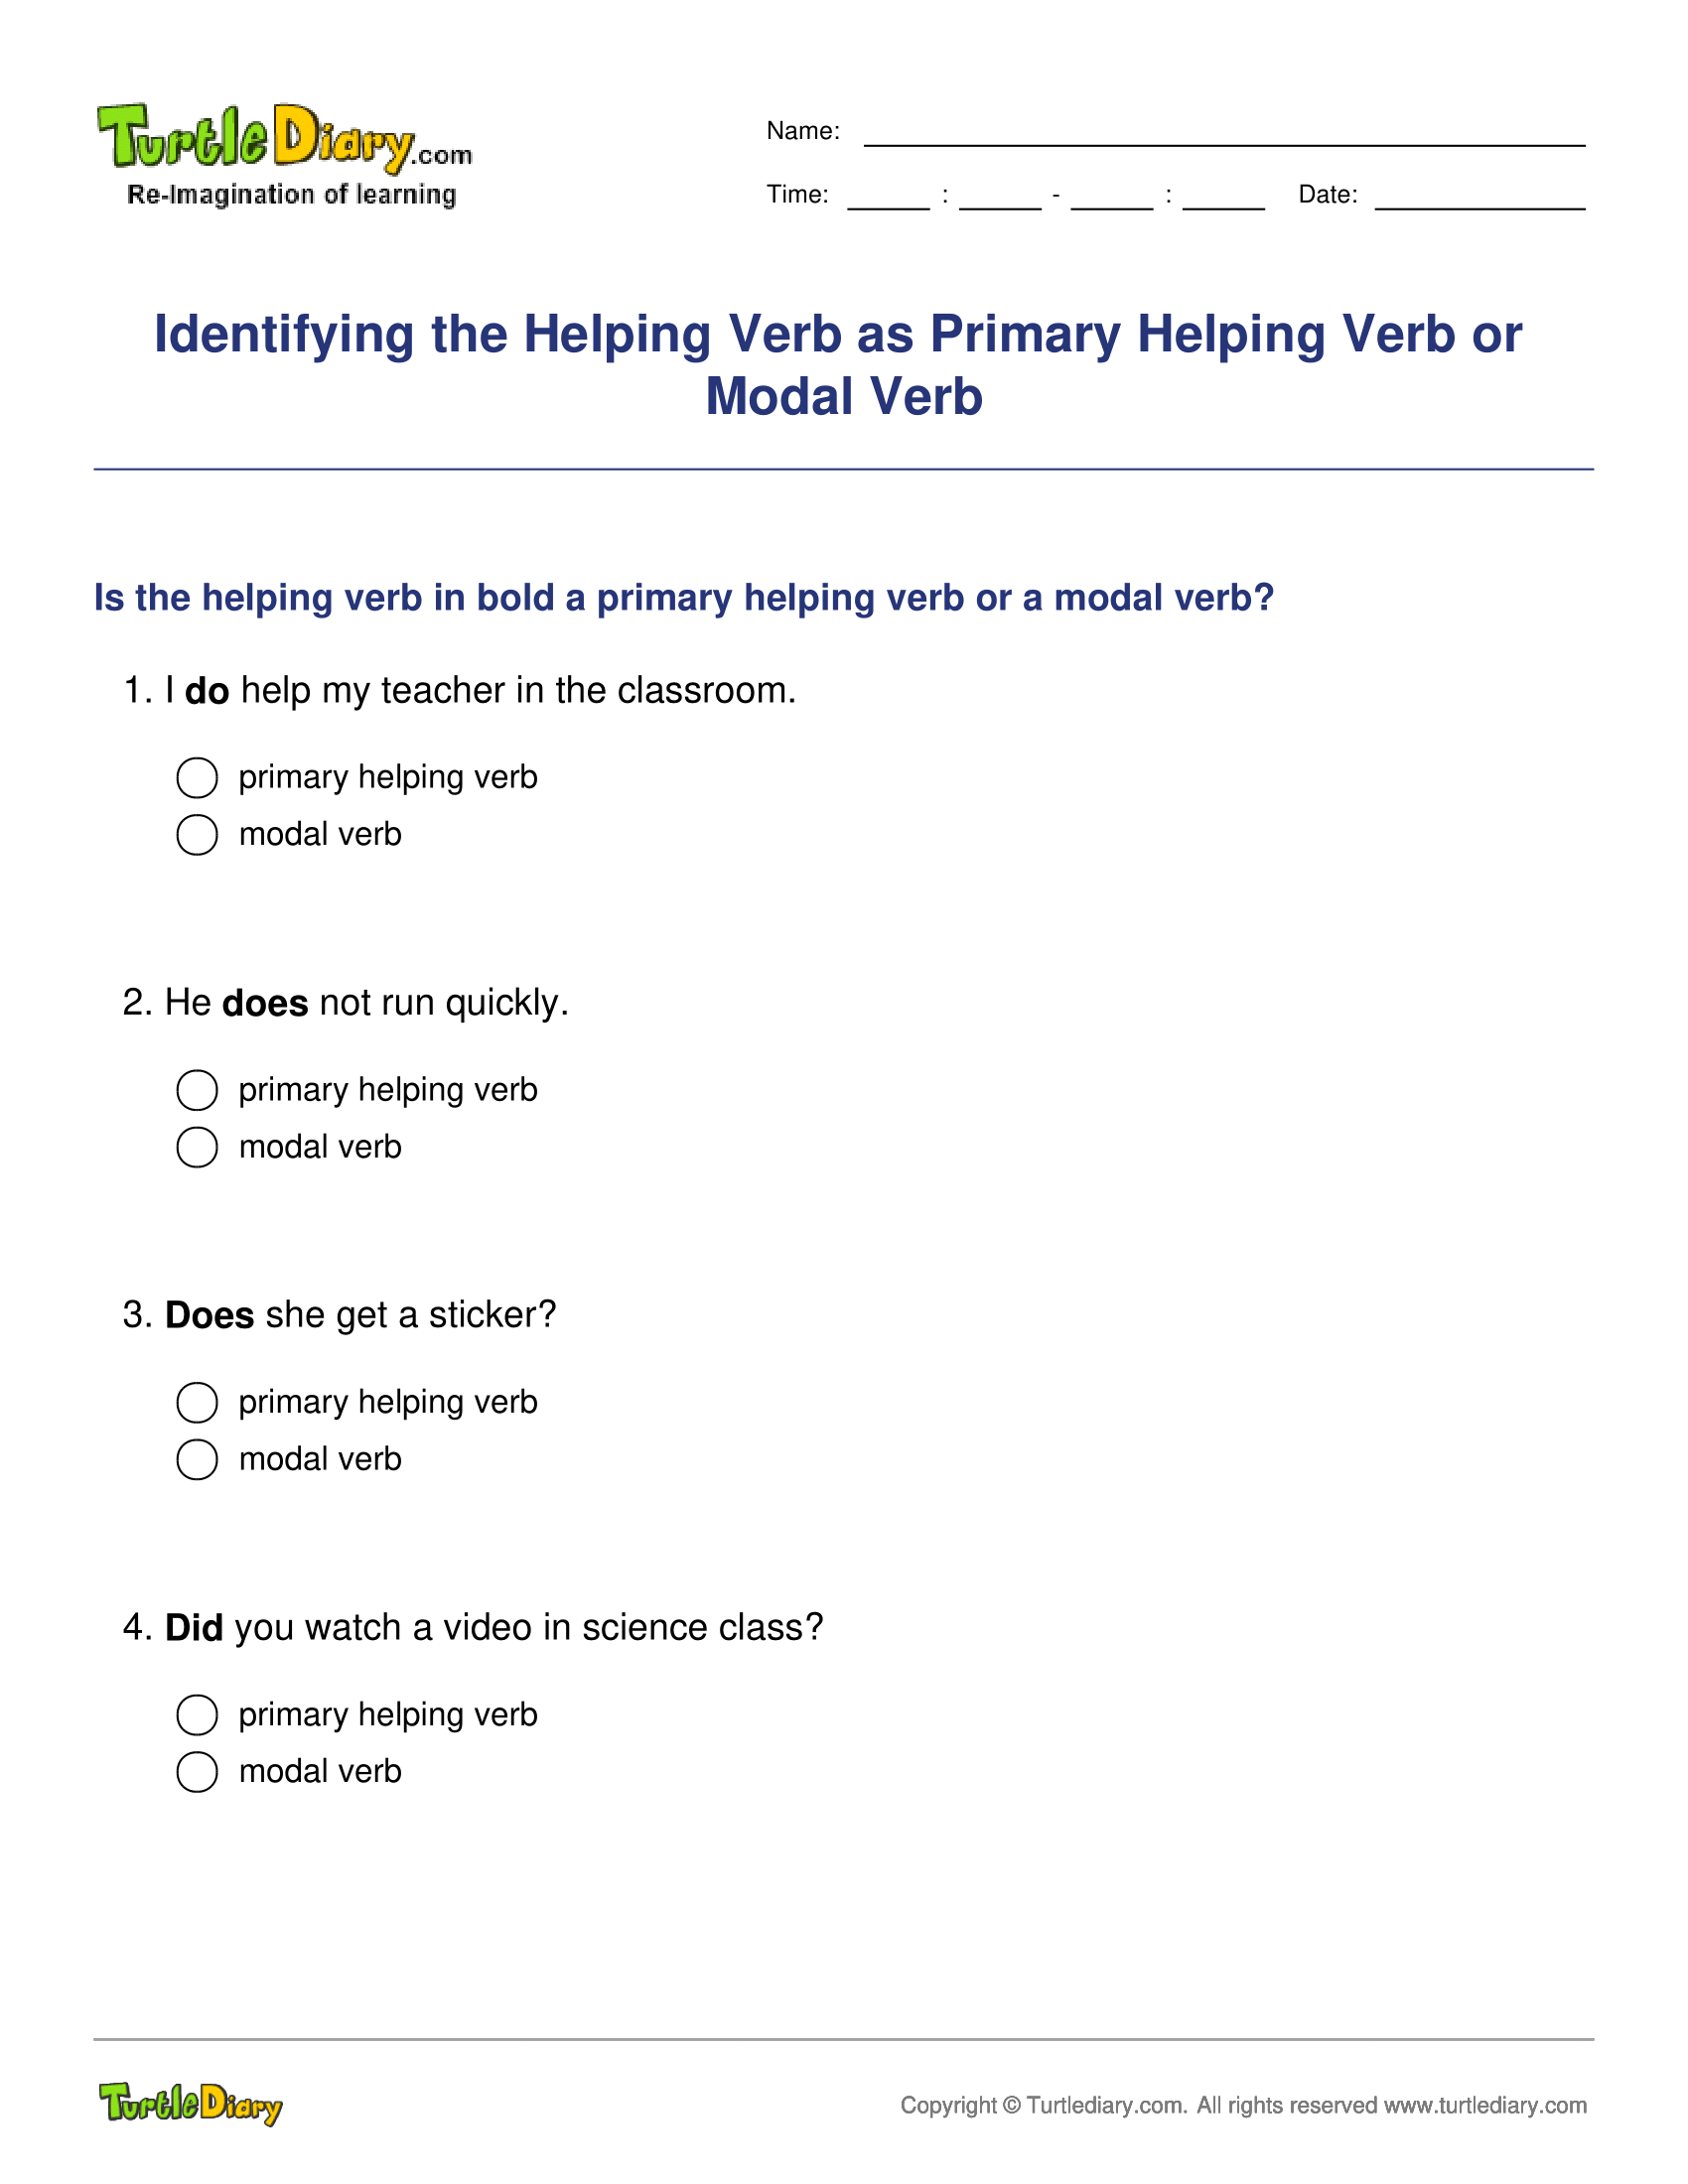 Identifying the Helping Verb as Primary Helping Verb or Modal Verb